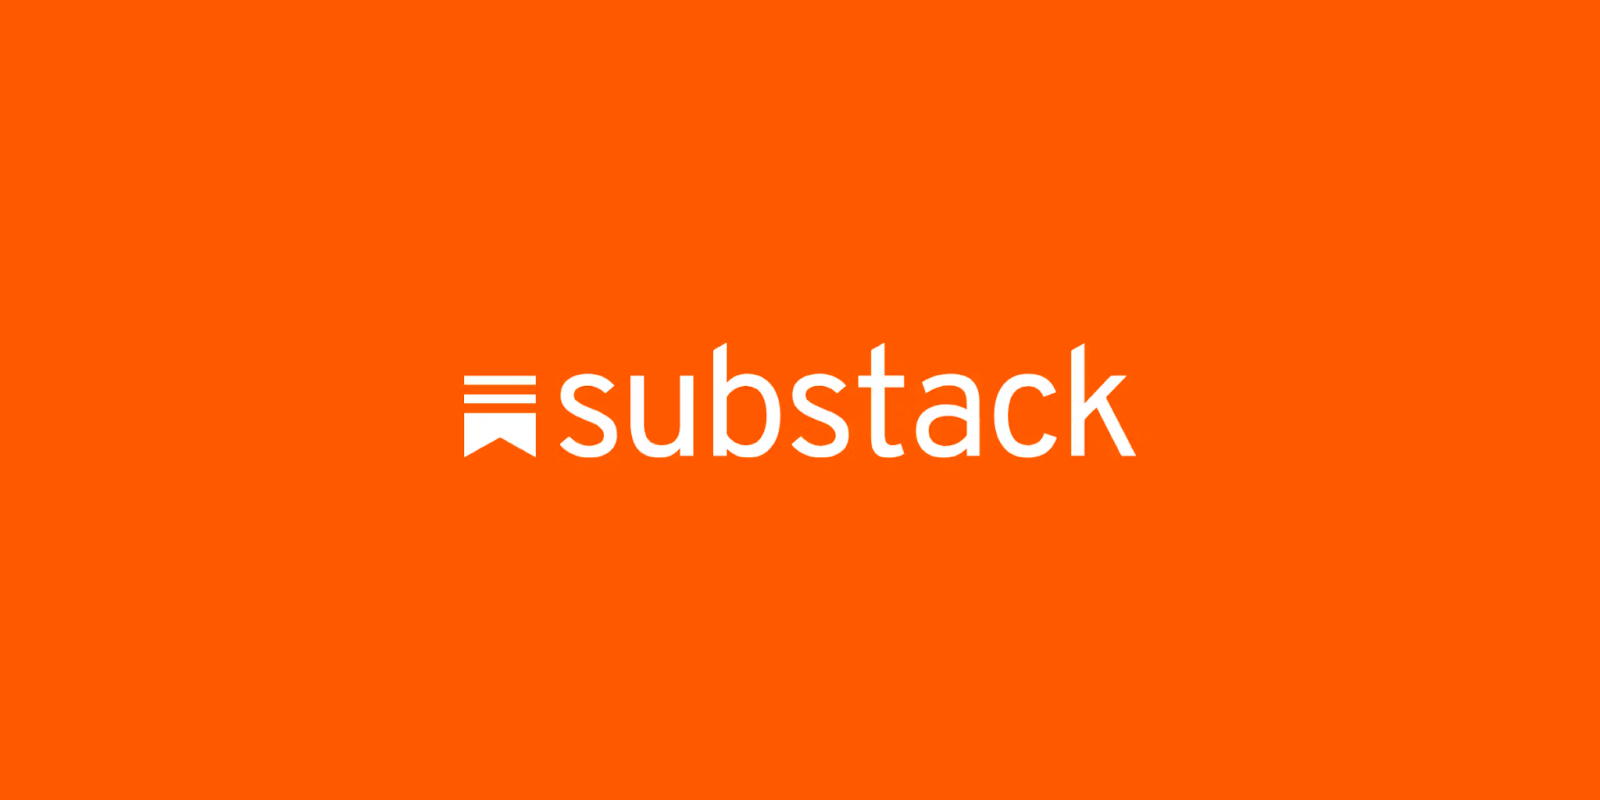  Substack Interview Process - A Detailed Guide